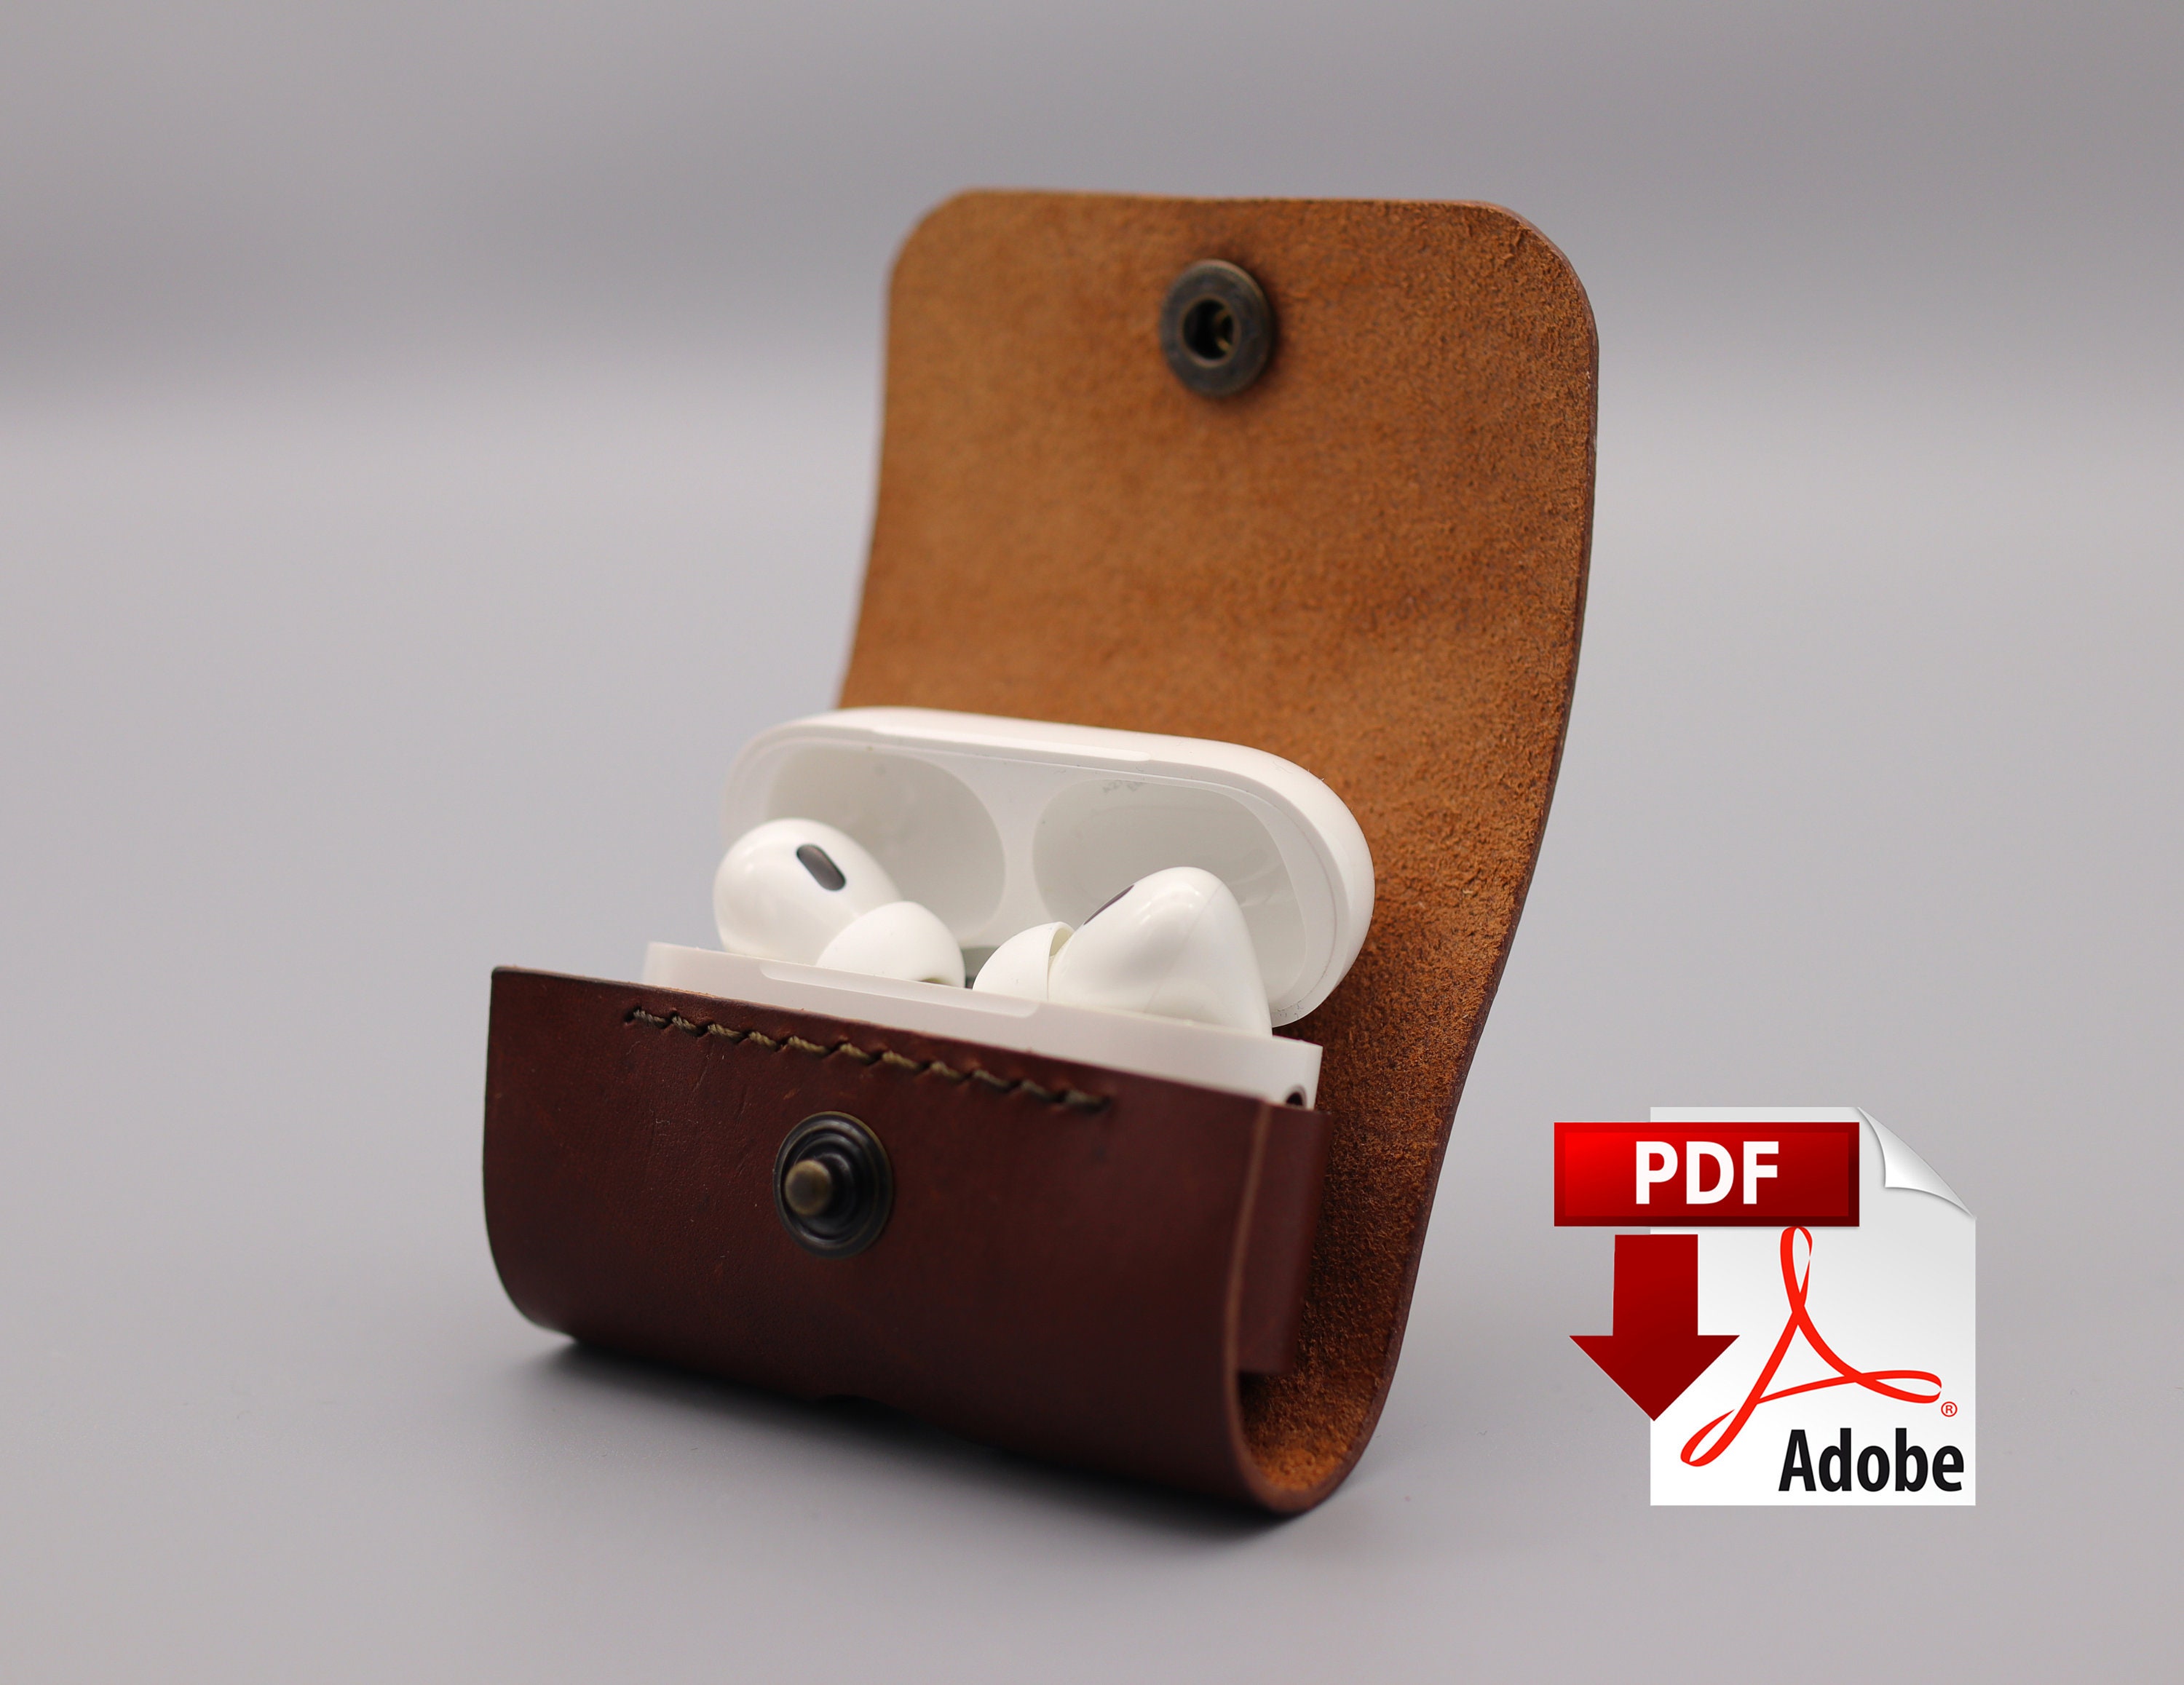 AF413-Pattern Design Pu Leather Case for AirPods Pro 2nd/1st